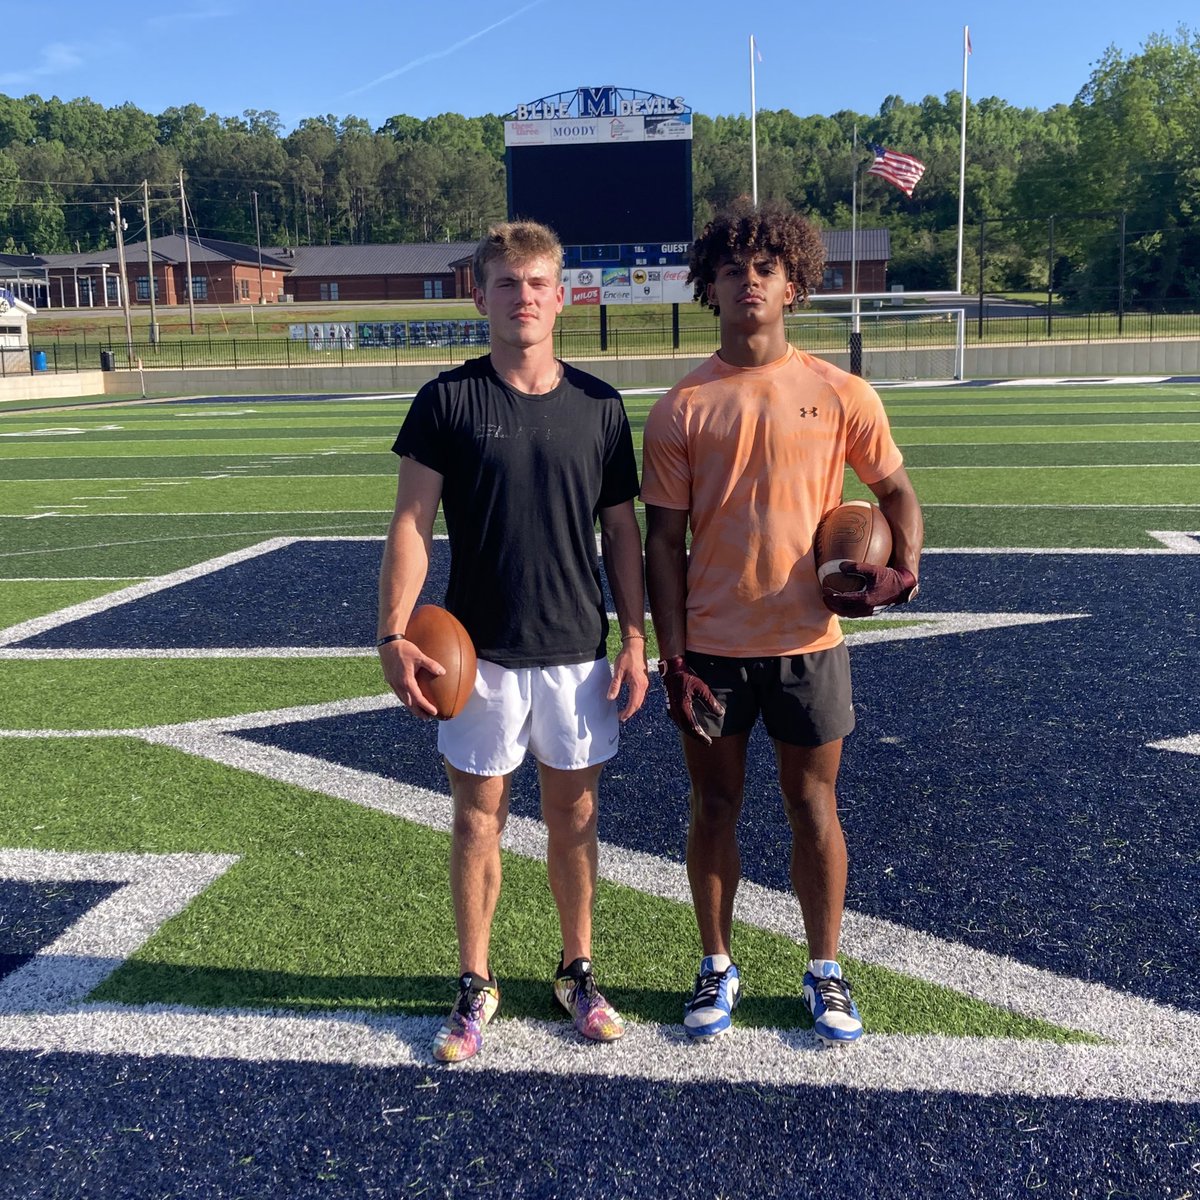 👀”Coming Out The Portal” @colemccartyy Got some visuals of the former ‘23 QB1 @MoodyFBall @colemccartyy who recently hit the transfer portal getting some work in…. Thanks to ‘24 WR & @HawksFootball commit @aidanrob1nson for getting some work in as well….visuals soon!